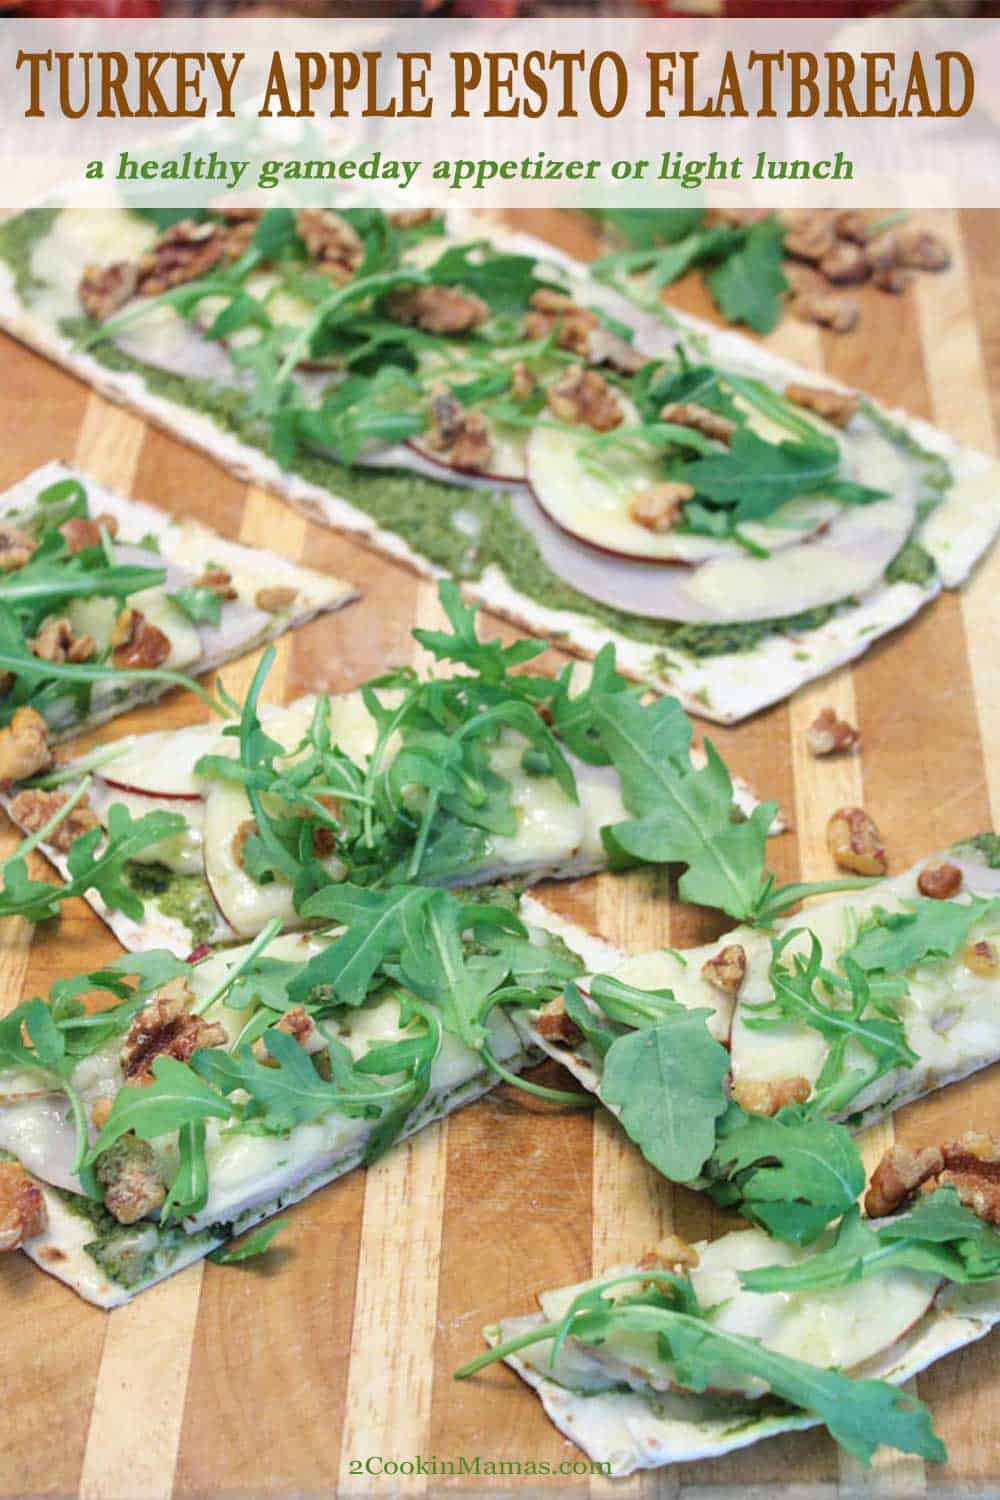 Turkey Apple Pesto Flatbread | 2 Cookin Mamas Whip up this easy Turkey Apple Pesto Flatbread for a healthy appetizer and watch it disappear! Great for gameday or any day! Bonus, the walnut pesto is great on sandwiches too! #appetizer #flatbread #gameday #apple #turkey #cheddarcheese #recipe #pesto #walnuts